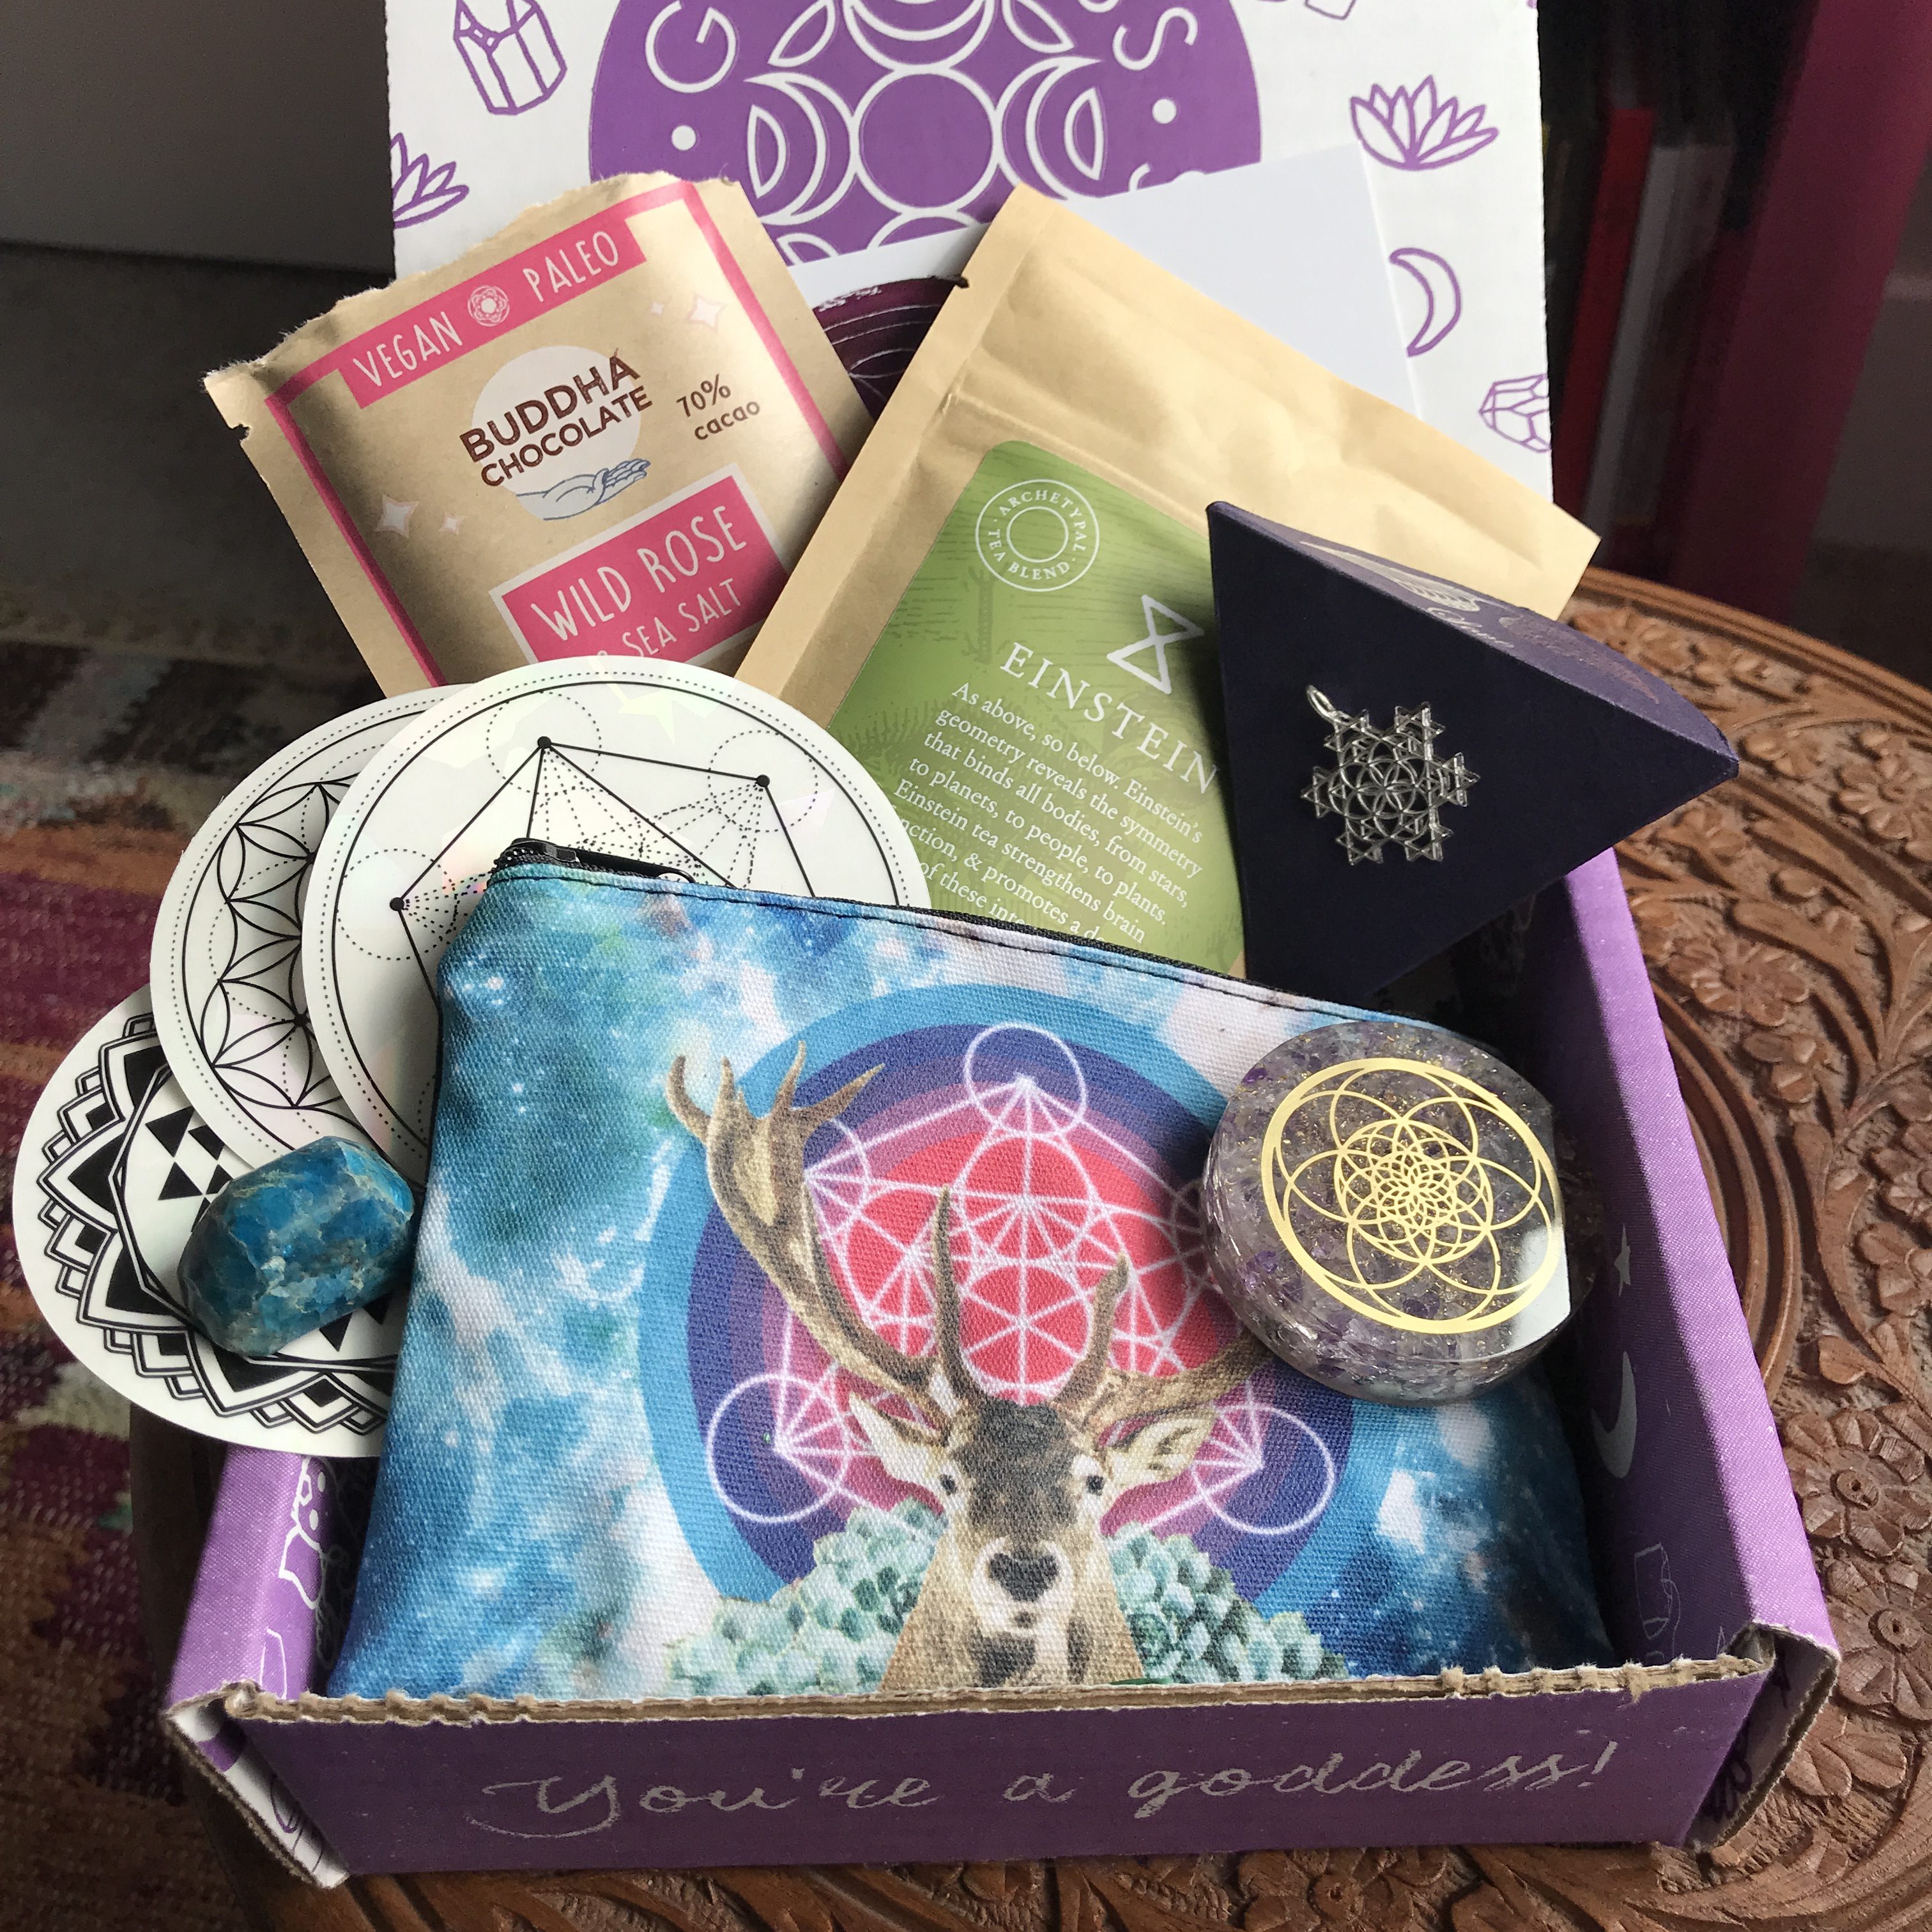 Goddess Provisions March 2019